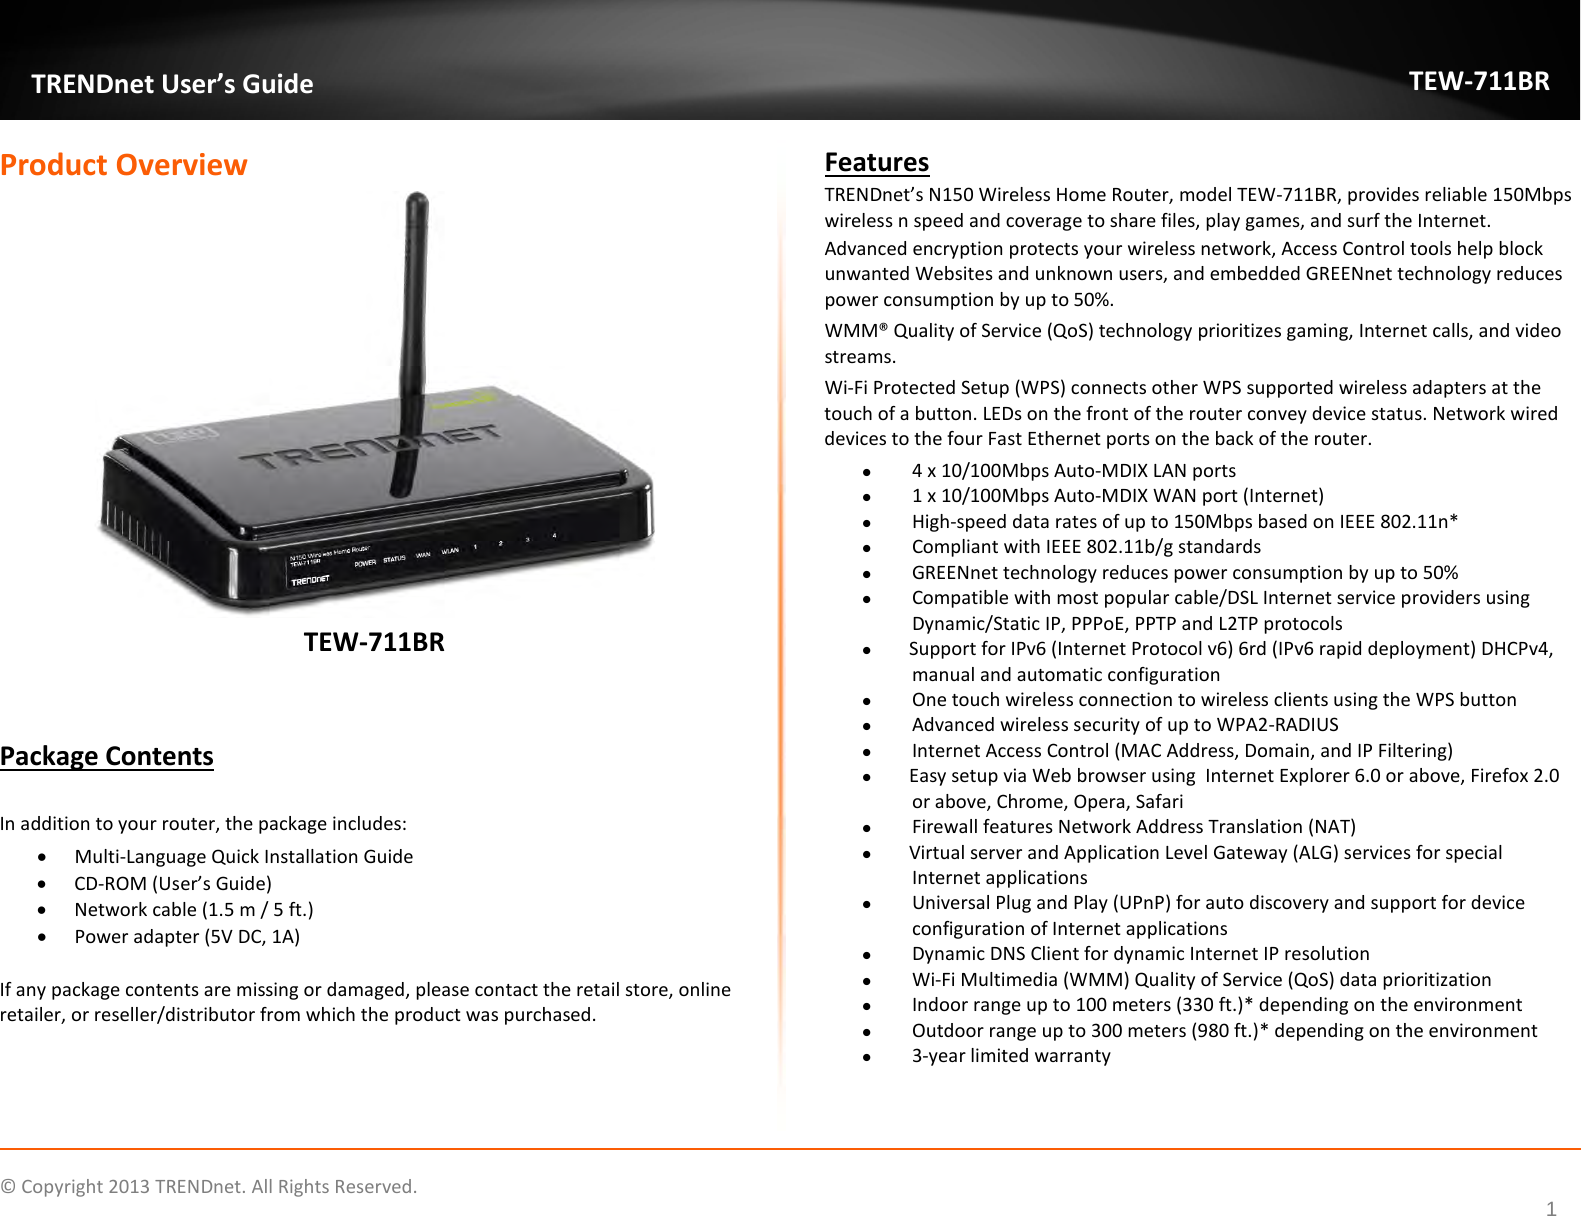              © Copyright 2013 TRENDnet. All Rights Reserved.       TRENDnet User’s Guide TEW-711BR 1 Product Overview  TEW-711BR   Package Contents  In addition to your router, the package includes: • Multi-Language Quick Installation Guide • CD-ROM (User’s Guide) • Network cable (1.5 m / 5 ft.) • Power adapter (5V DC, 1A)  If any package contents are missing or damaged, please contact the retail store, online retailer, or reseller/distributor from which the product was purchased. Features TRENDnet’s N150 Wireless Home Router, model TEW-711BR, provides reliable 150Mbps wireless n speed and coverage to share files, play games, and surf the Internet.  Advanced encryption protects your wireless network, Access Control tools help block unwanted Websites and unknown users, and embedded GREENnet technology reduces power consumption by up to 50%.  WMM® Quality of Service (QoS) technology prioritizes gaming, Internet calls, and video streams.  Wi-Fi Protected Setup (WPS) connects other WPS supported wireless adapters at the touch of a button. LEDs on the front of the router convey device status. Network wired devices to the four Fast Ethernet ports on the back of the router.  4 x 10/100Mbps Auto-MDIX LAN ports   1 x 10/100Mbps Auto-MDIX WAN port (Internet)  High-speed data rates of up to 150Mbps based on IEEE 802.11n*   Compliant with IEEE 802.11b/g standards  GREENnet technology reduces power consumption by up to 50%  Compatible with most popular cable/DSL Internet service providers using Dynamic/Static IP, PPPoE, PPTP and L2TP protocols  Support for IPv6 (Internet Protocol v6) 6rd (IPv6 rapid deployment) DHCPv4, manual and automatic configuration  One touch wireless connection to wireless clients using the WPS button  Advanced wireless security of up to WPA2-RADIUS  Internet Access Control (MAC Address, Domain, and IP Filtering)  Easy setup via Web browser using  Internet Explorer 6.0 or above, Firefox 2.0 or above, Chrome, Opera, Safari  Firewall features Network Address Translation (NAT)  Virtual server and Application Level Gateway (ALG) services for special Internet applications   Universal Plug and Play (UPnP) for auto discovery and support for device configuration of Internet applications   Dynamic DNS Client for dynamic Internet IP resolution  Wi-Fi Multimedia (WMM) Quality of Service (QoS) data prioritization  Indoor range up to 100 meters (330 ft.)* depending on the environment   Outdoor range up to 300 meters (980 ft.)* depending on the environment   3-year limited warranty  